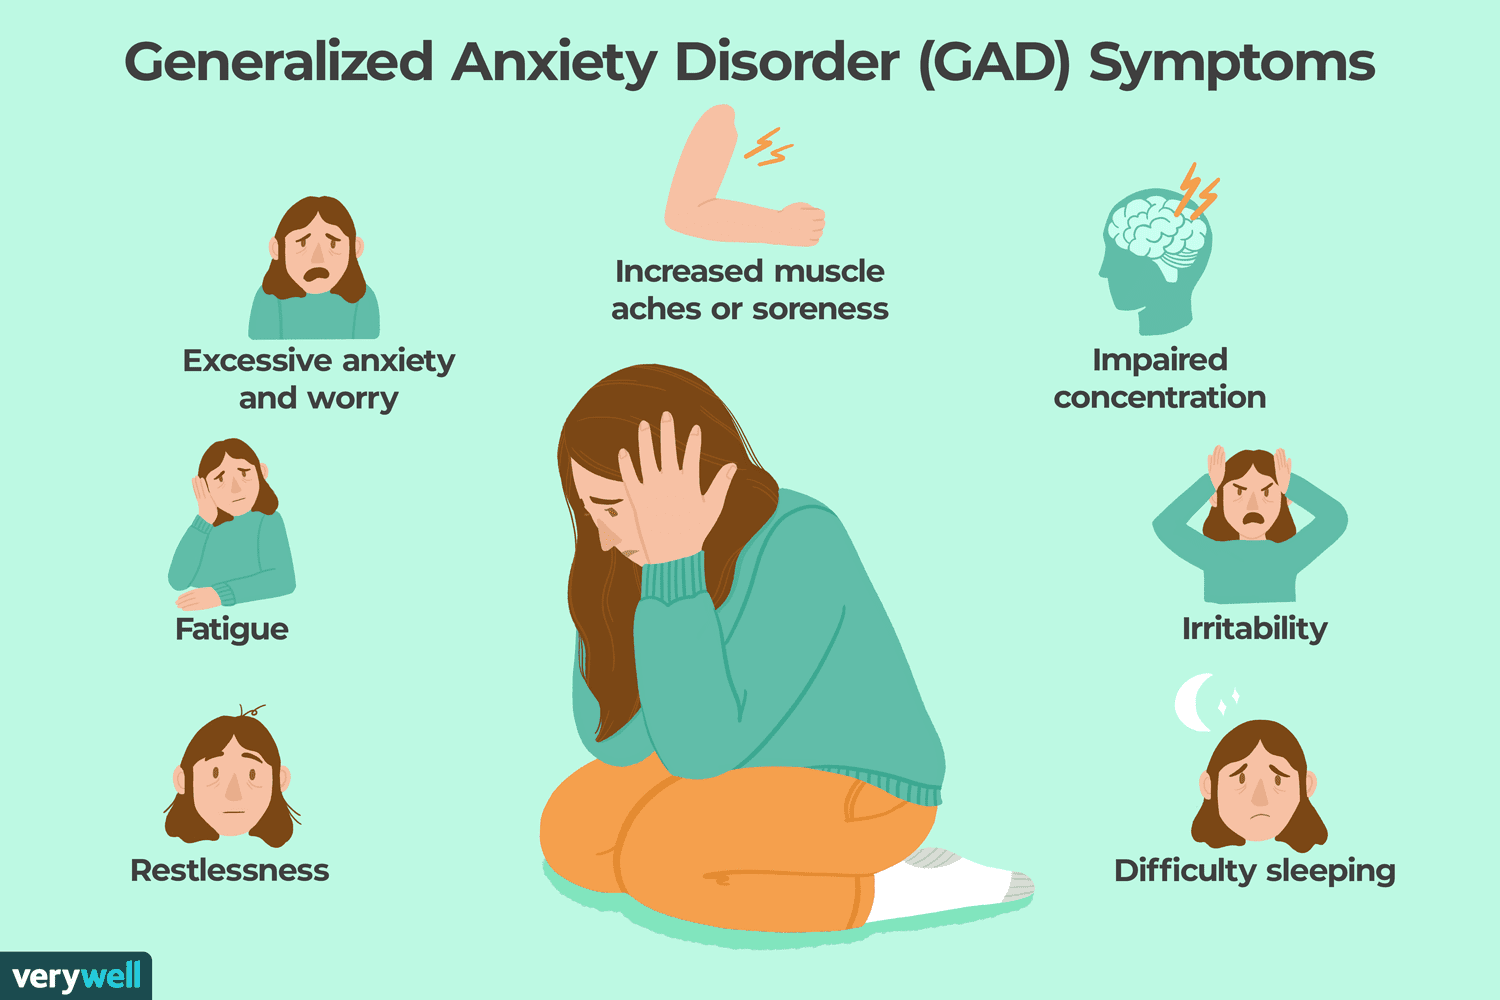 dsm-5-criteria-for-generalized-anxiety-disorder-1393147-final-5cde49b87f644d4a9eb25ad7ab1ceae0-b21cd702